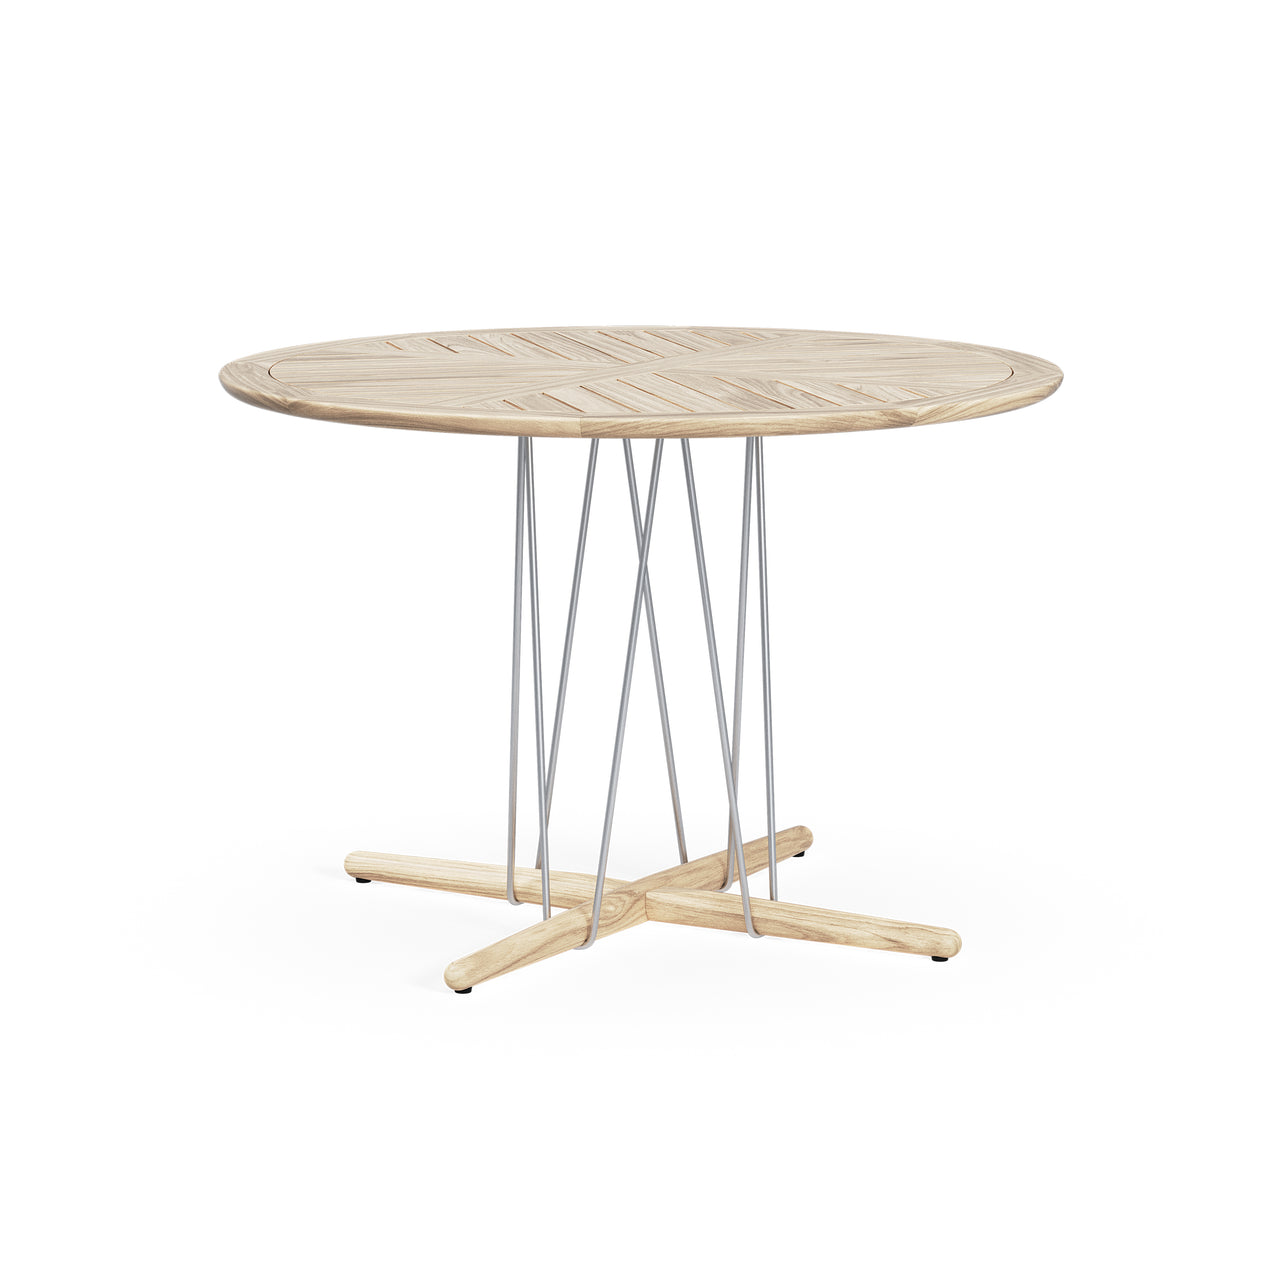 E022 Embrace Outdoor Dining Table: Medium - 43.3